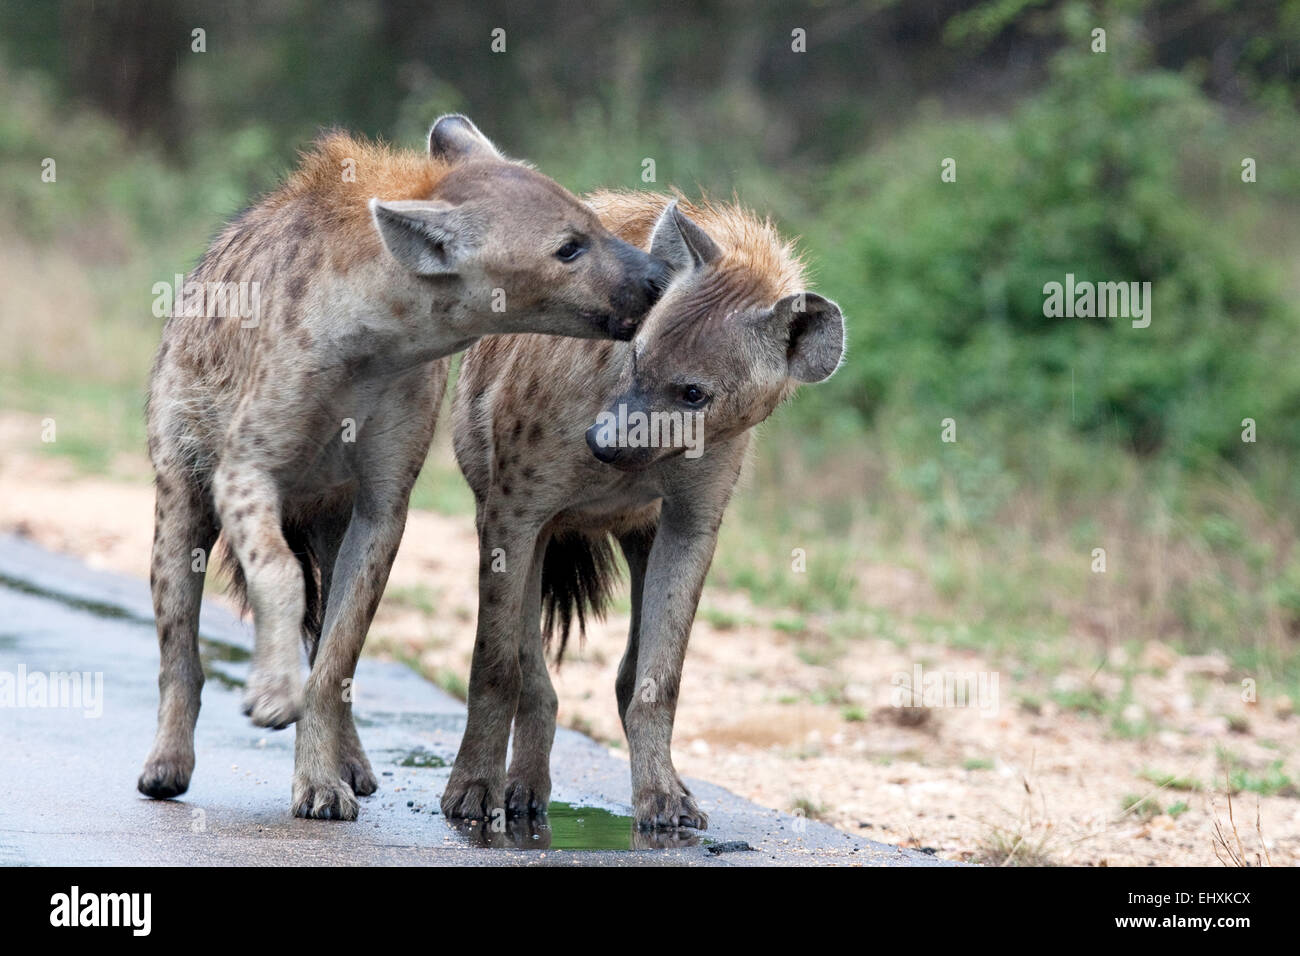 Two spotted hyenas standing on road, South Africa Stock Photo